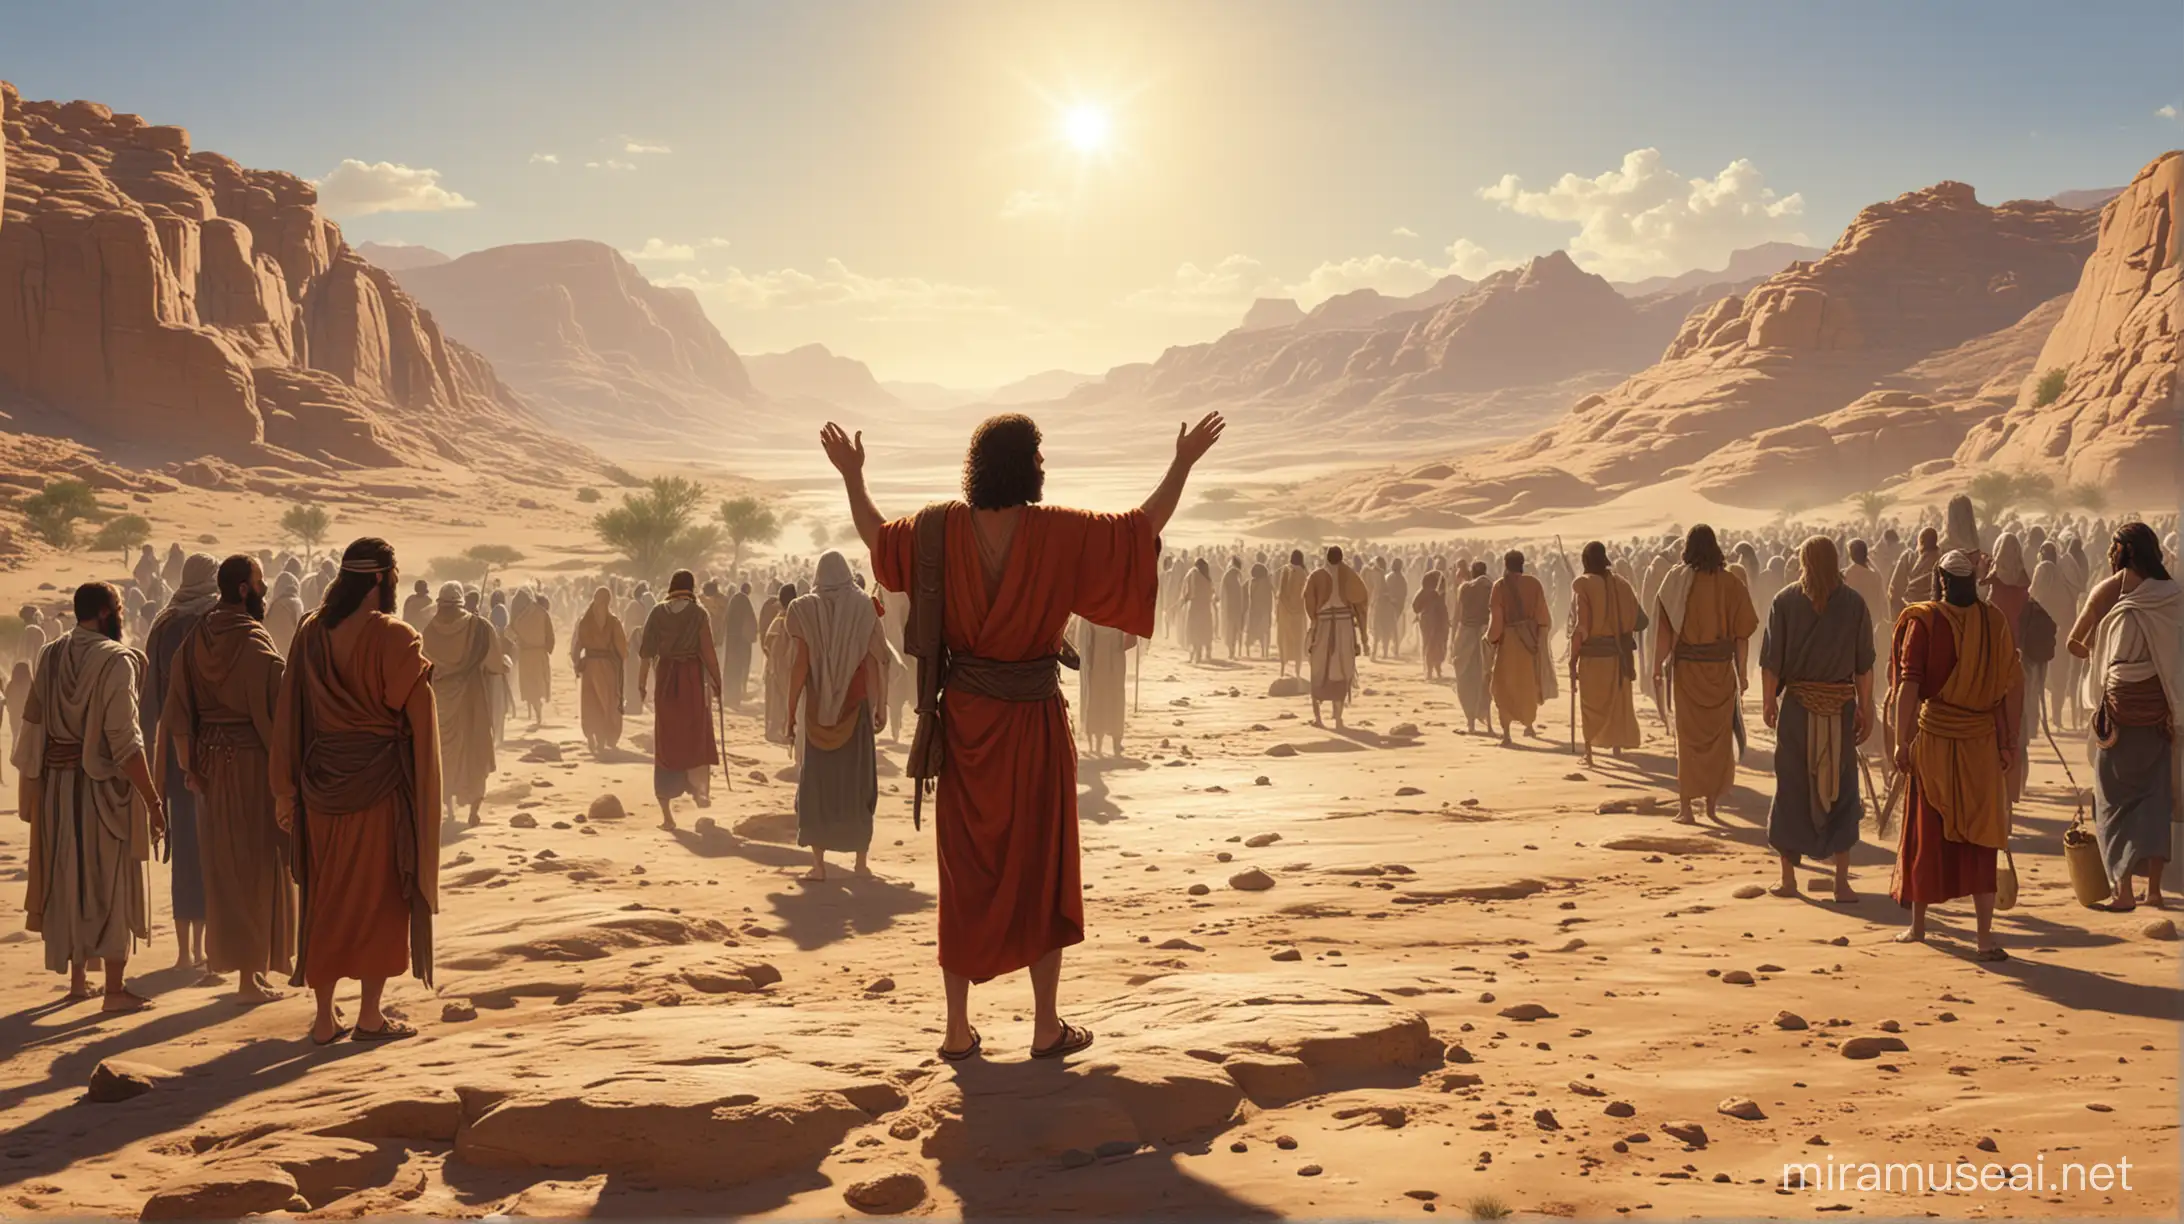 The people are in the desert and moses brings forth water from a rock